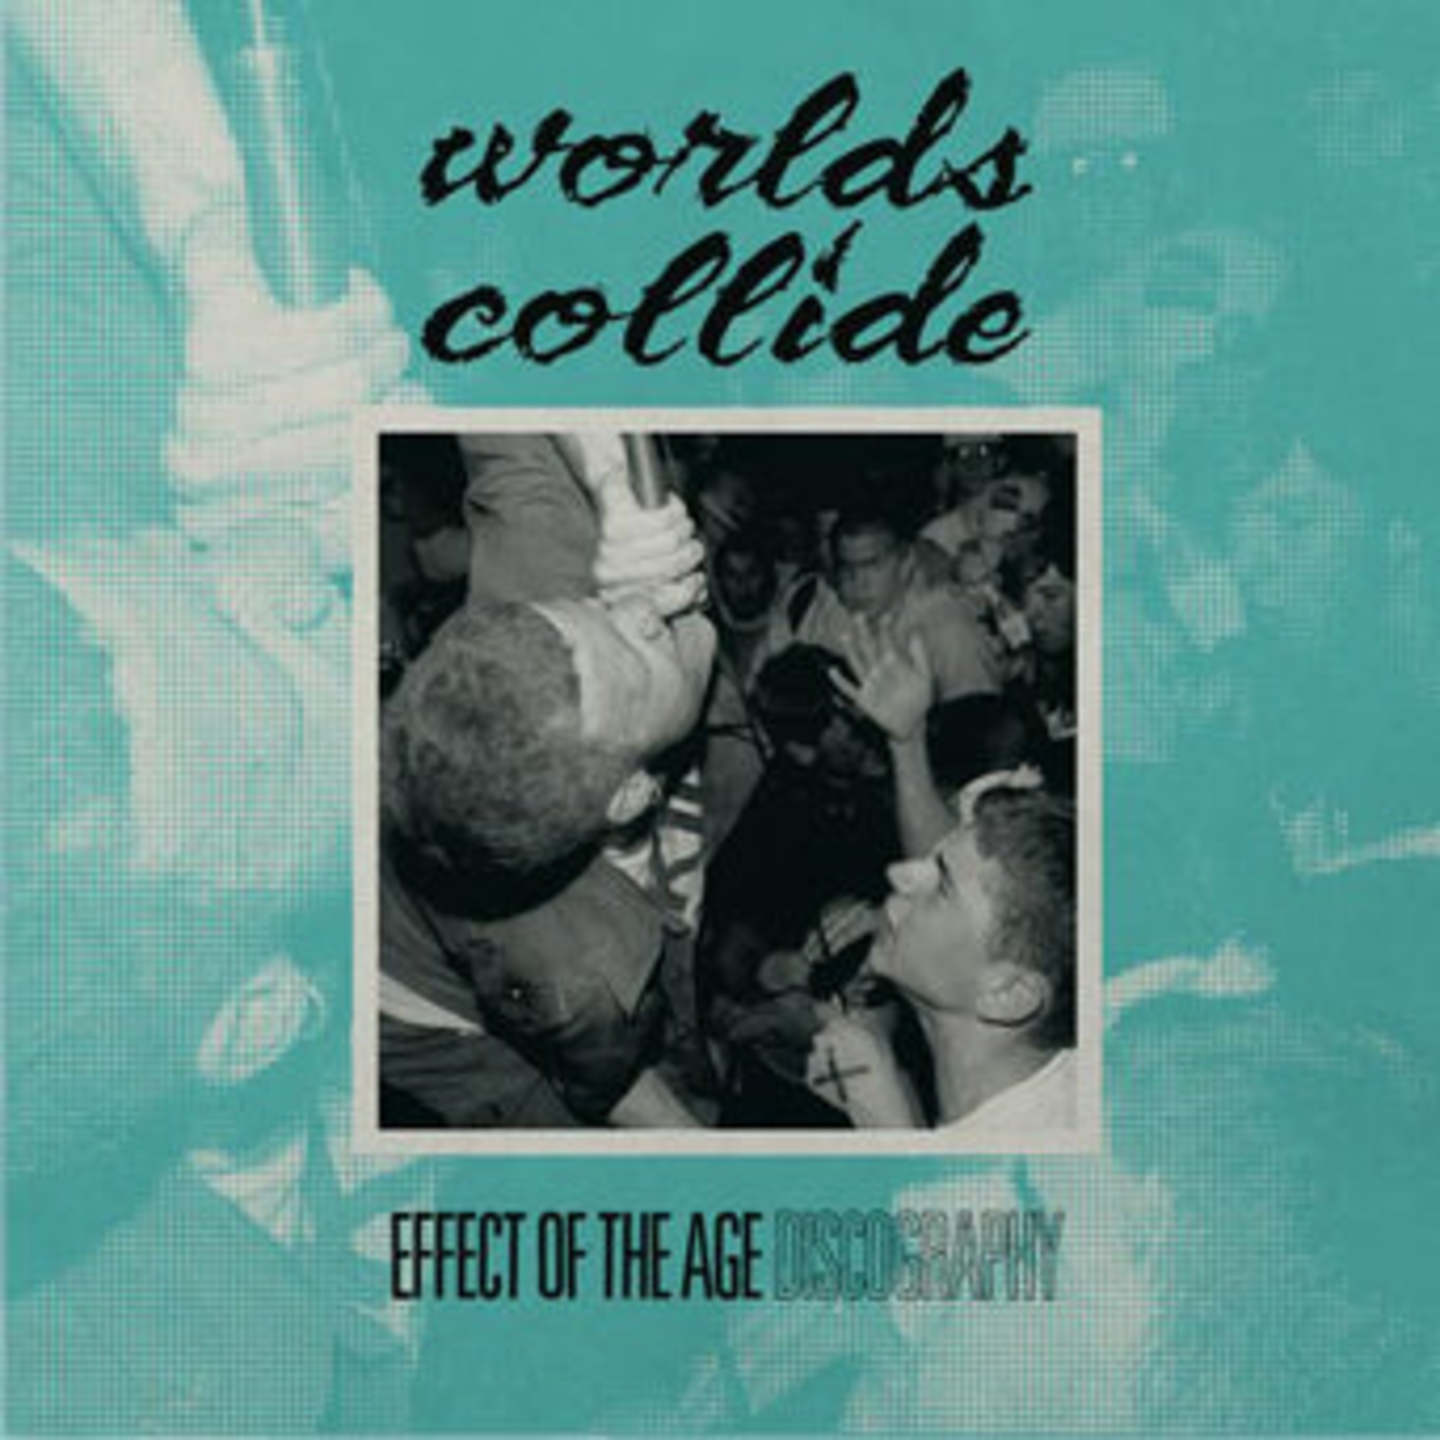 WORLDS COLLIDE - Effect Of The Age Discography LP Green vinyl